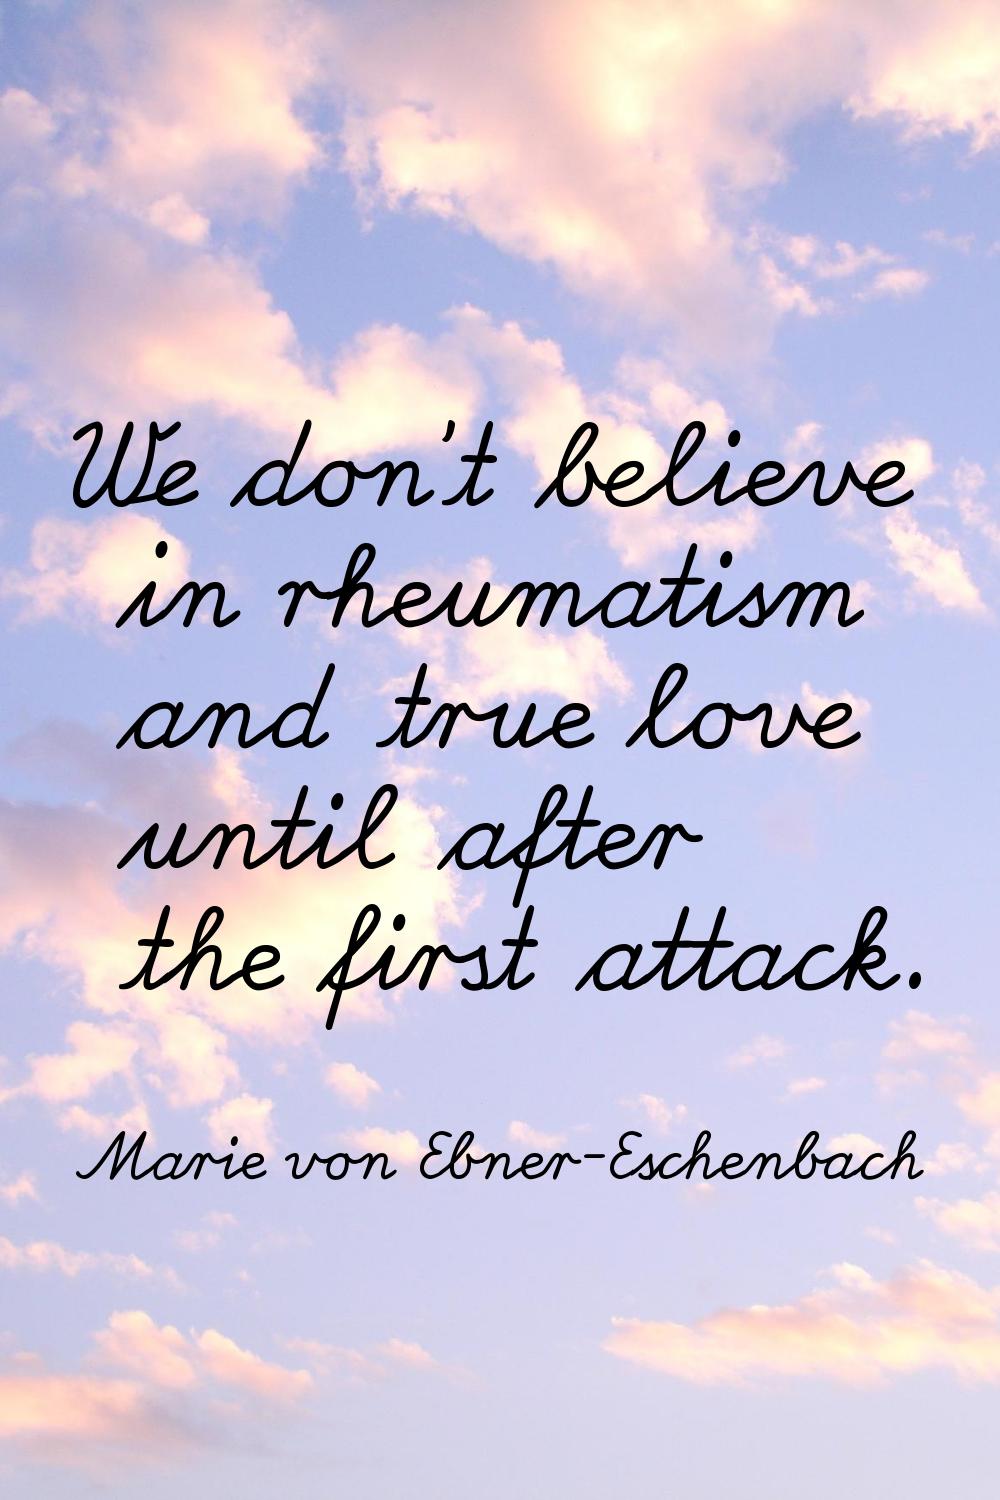 We don't believe in rheumatism and true love until after the first attack.